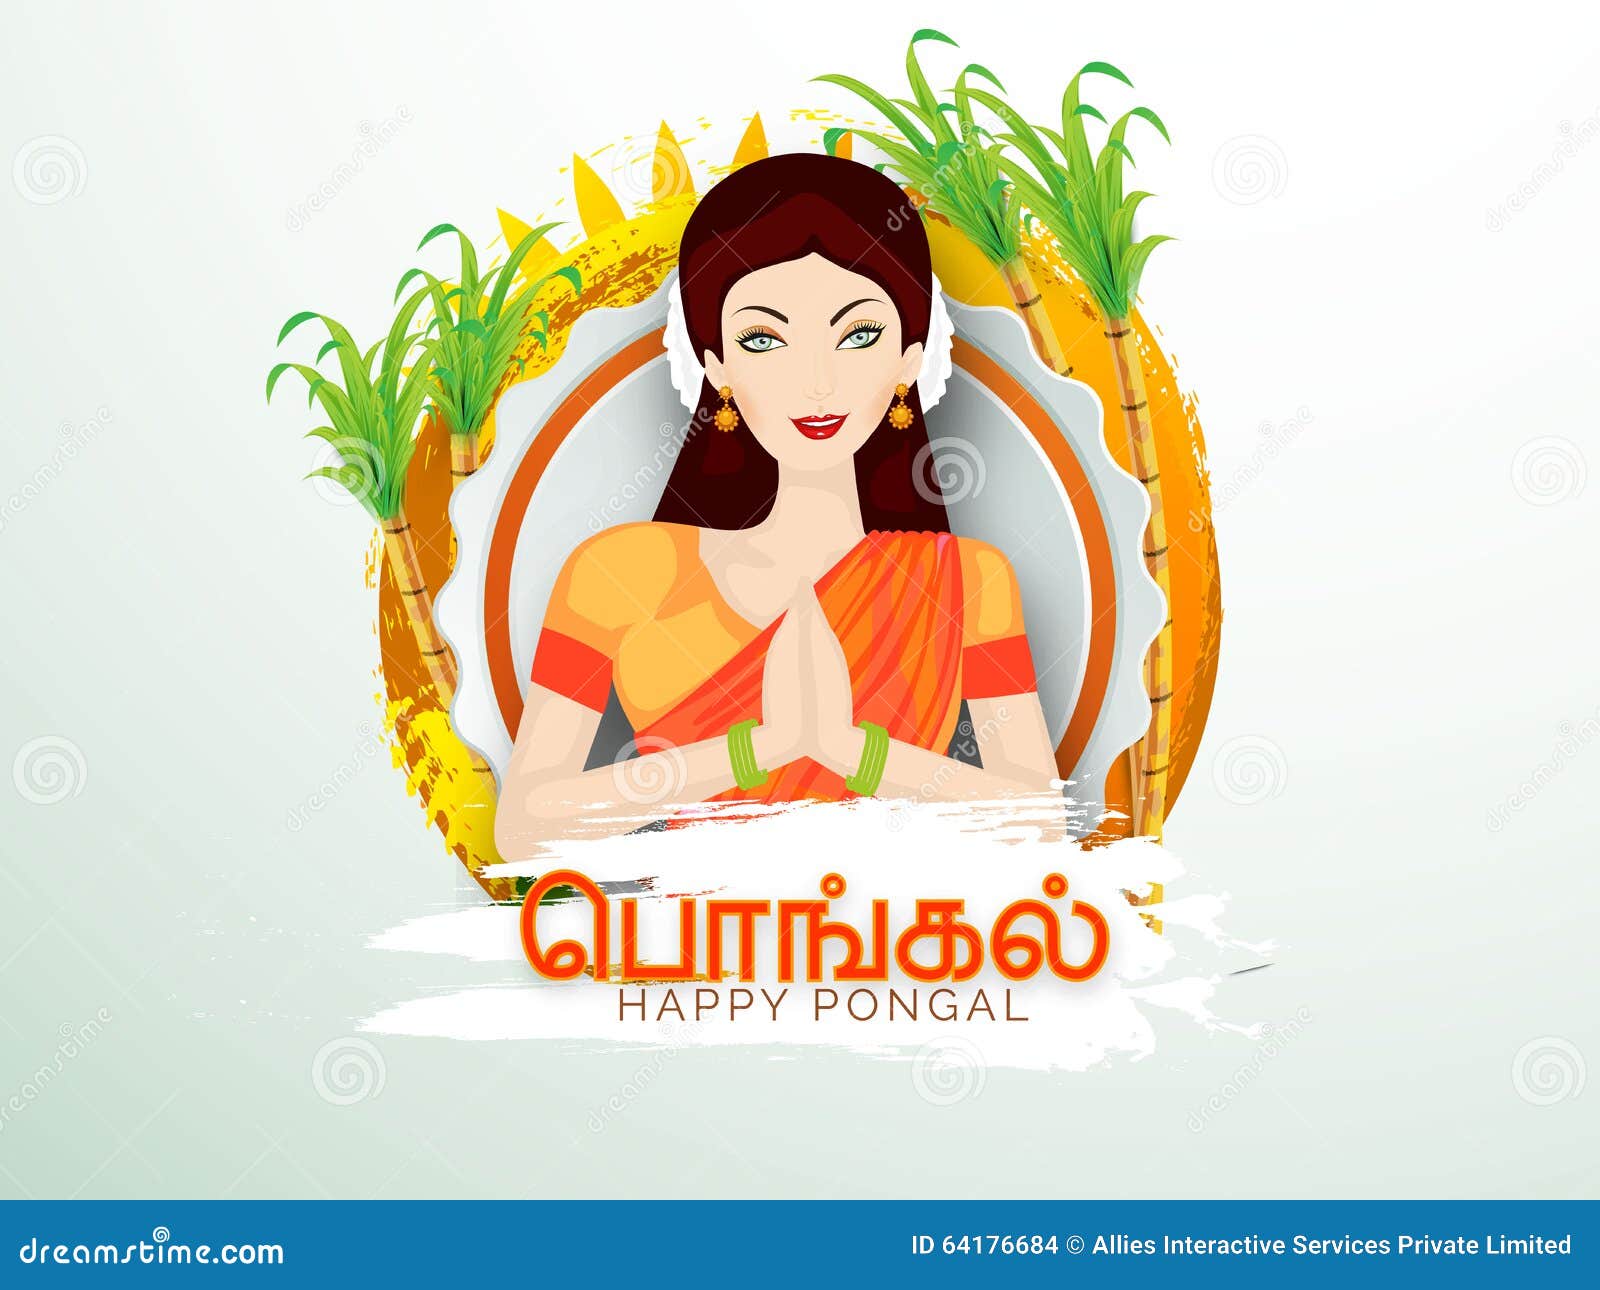 Young Girl Happy Pongal Celebration Stock Illustrations – 8 Young Girl  Happy Pongal Celebration Stock Illustrations, Vectors & Clipart - Dreamstime